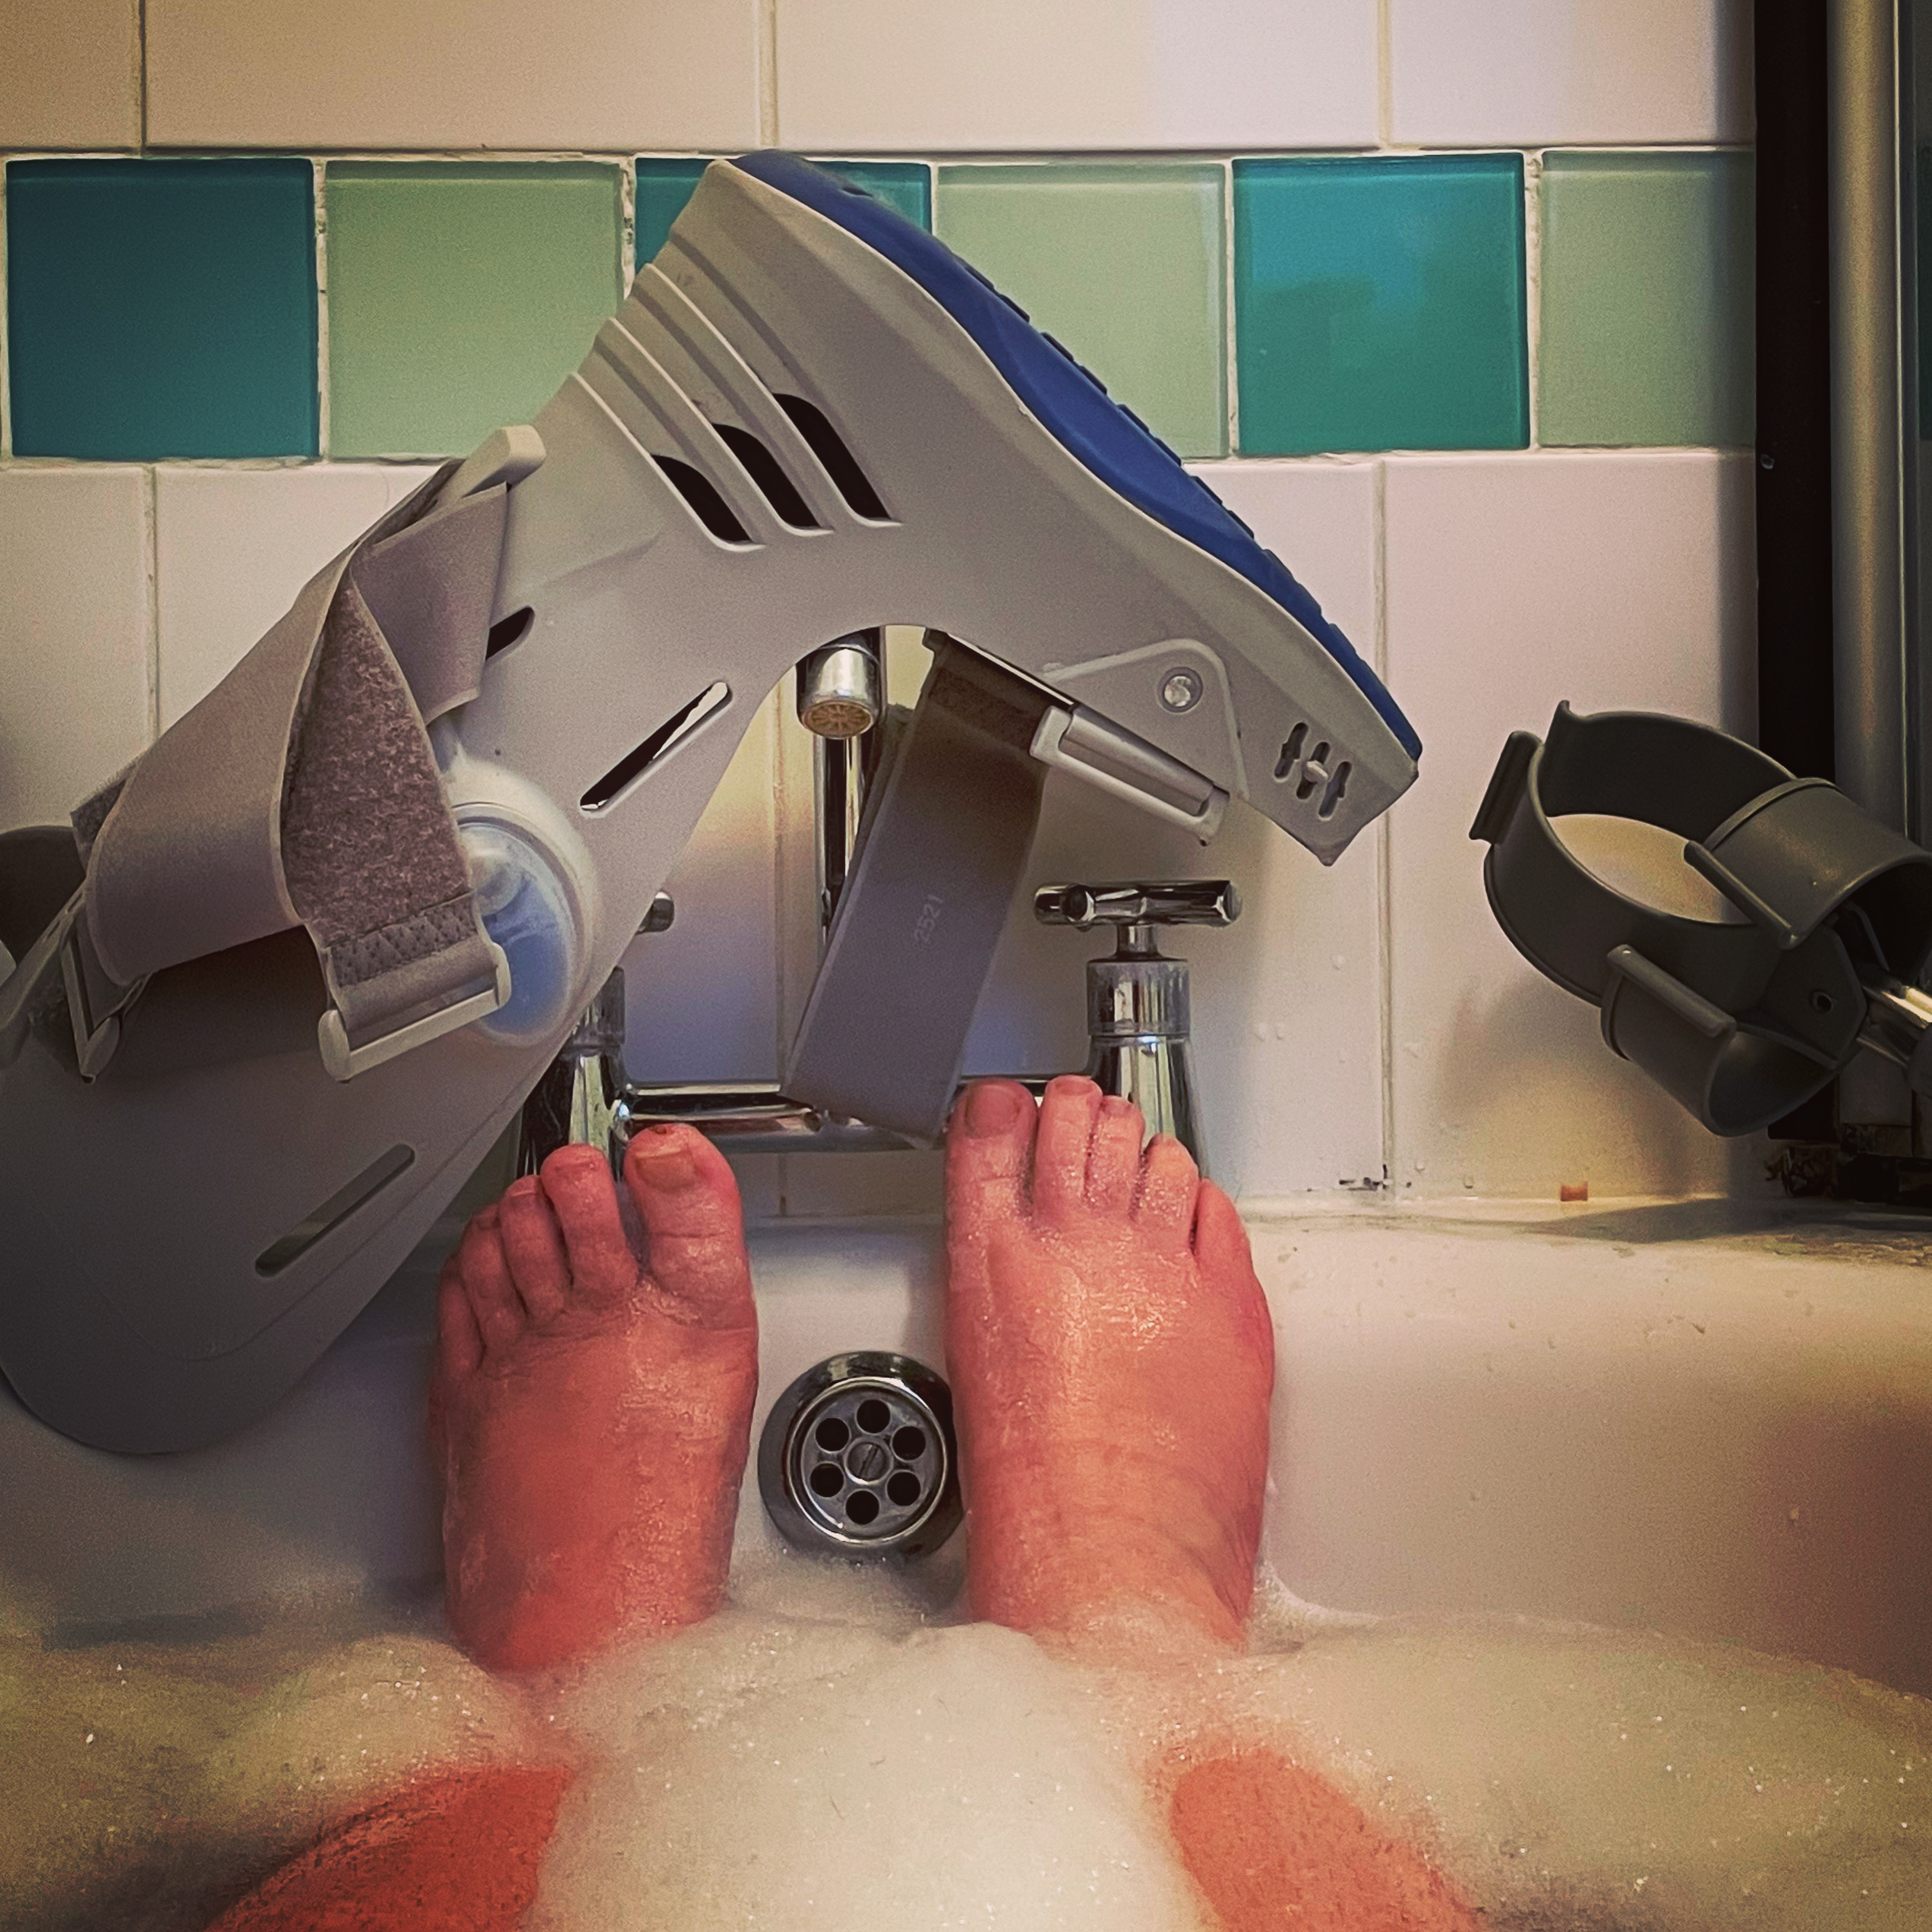 Fracture boot in the bath